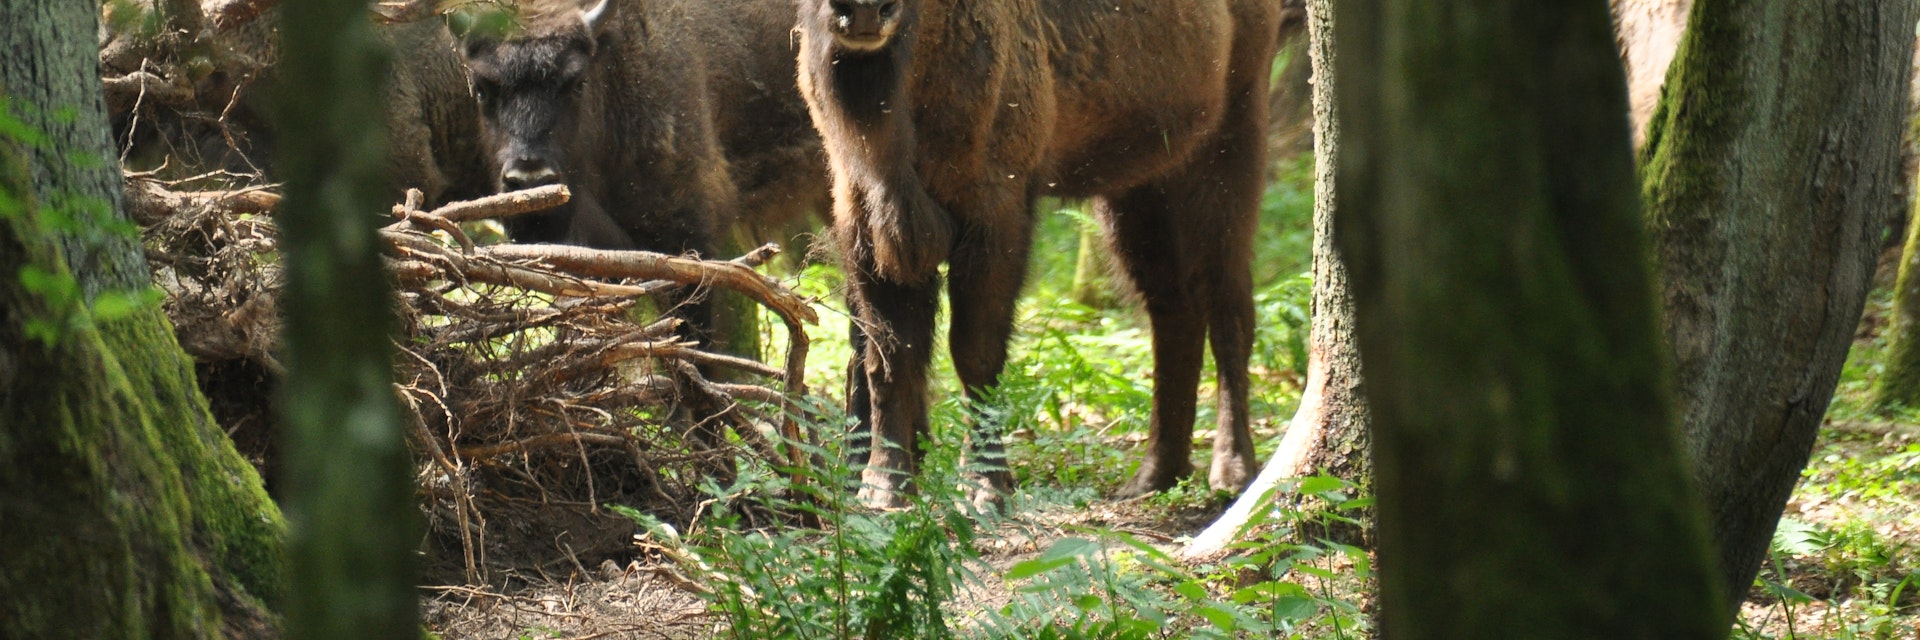 European bison in the forest in the Biaowieza Primeval Forest. The largest species of mammal found in Europe. Ungulates living in herds. Endangered species.